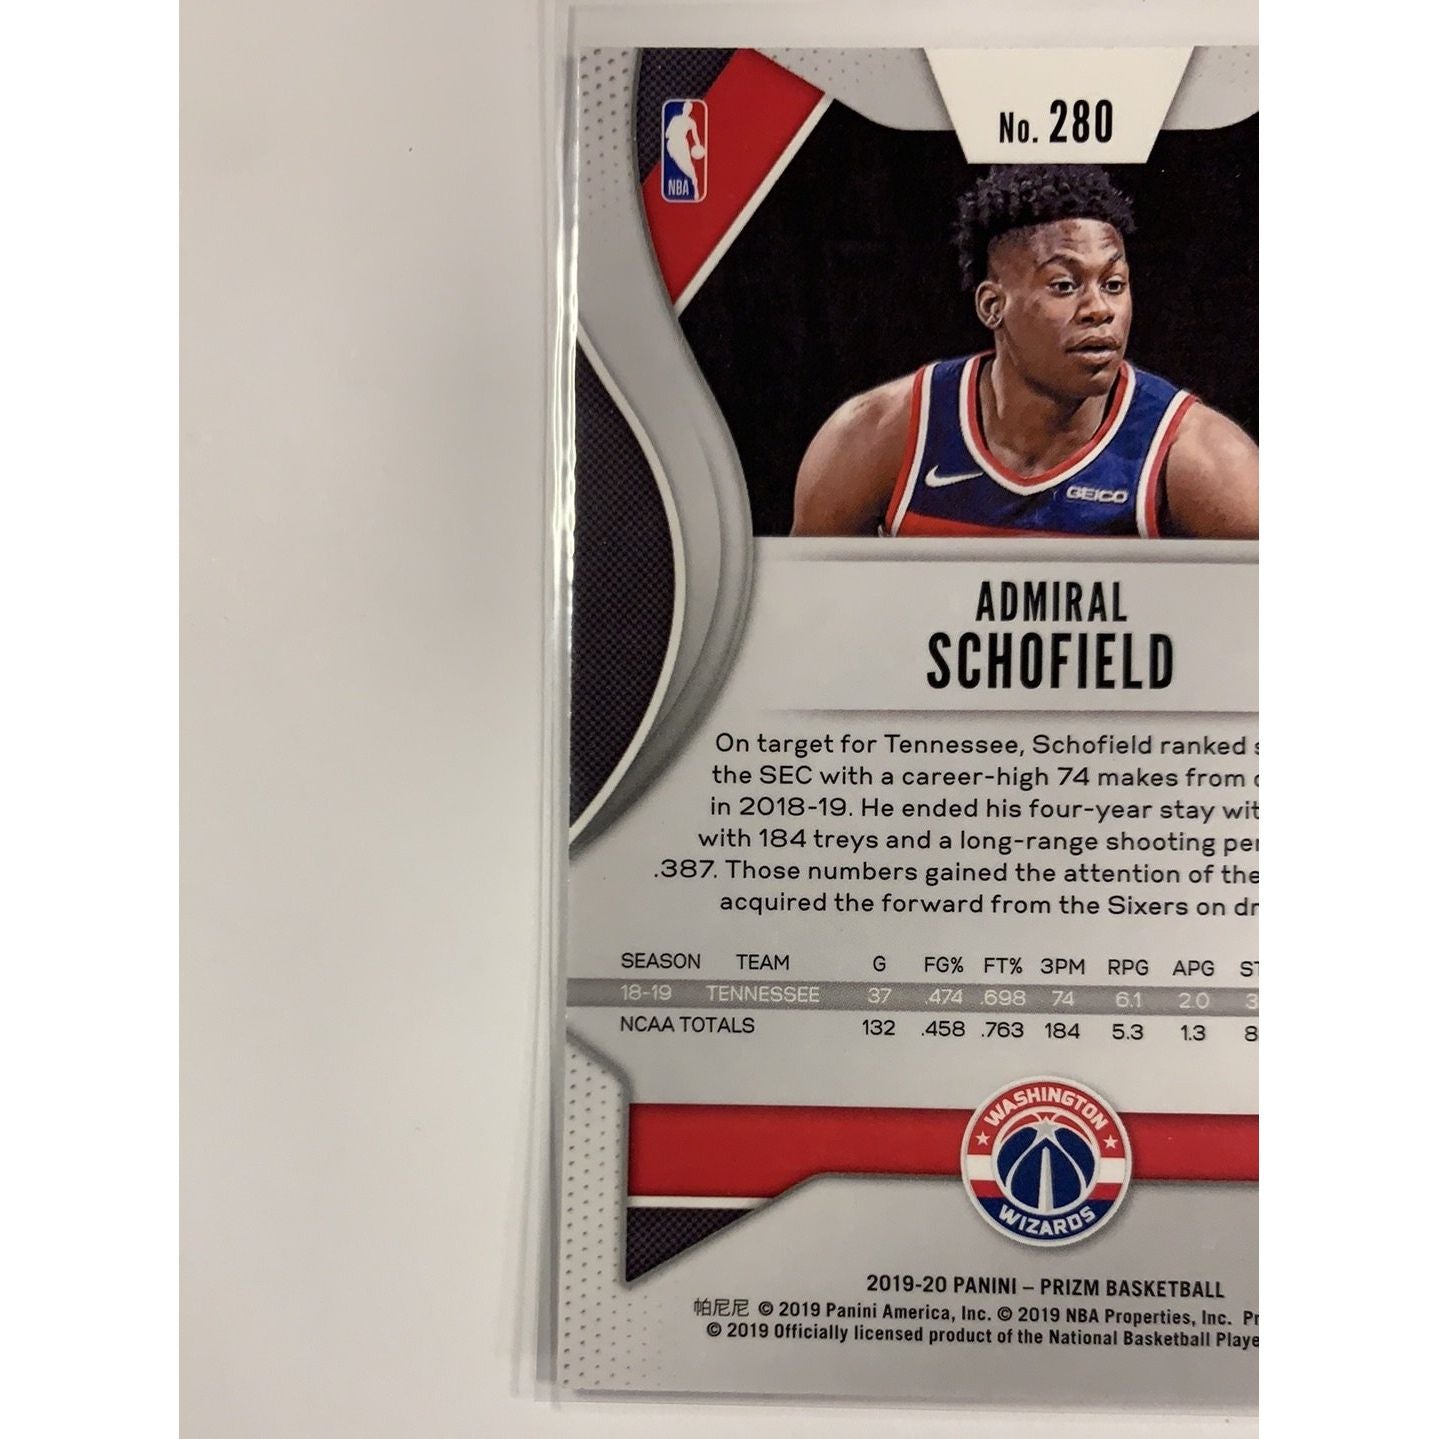  2019-20 Panini Prizm Admiral Schofield RC  Local Legends Cards & Collectibles